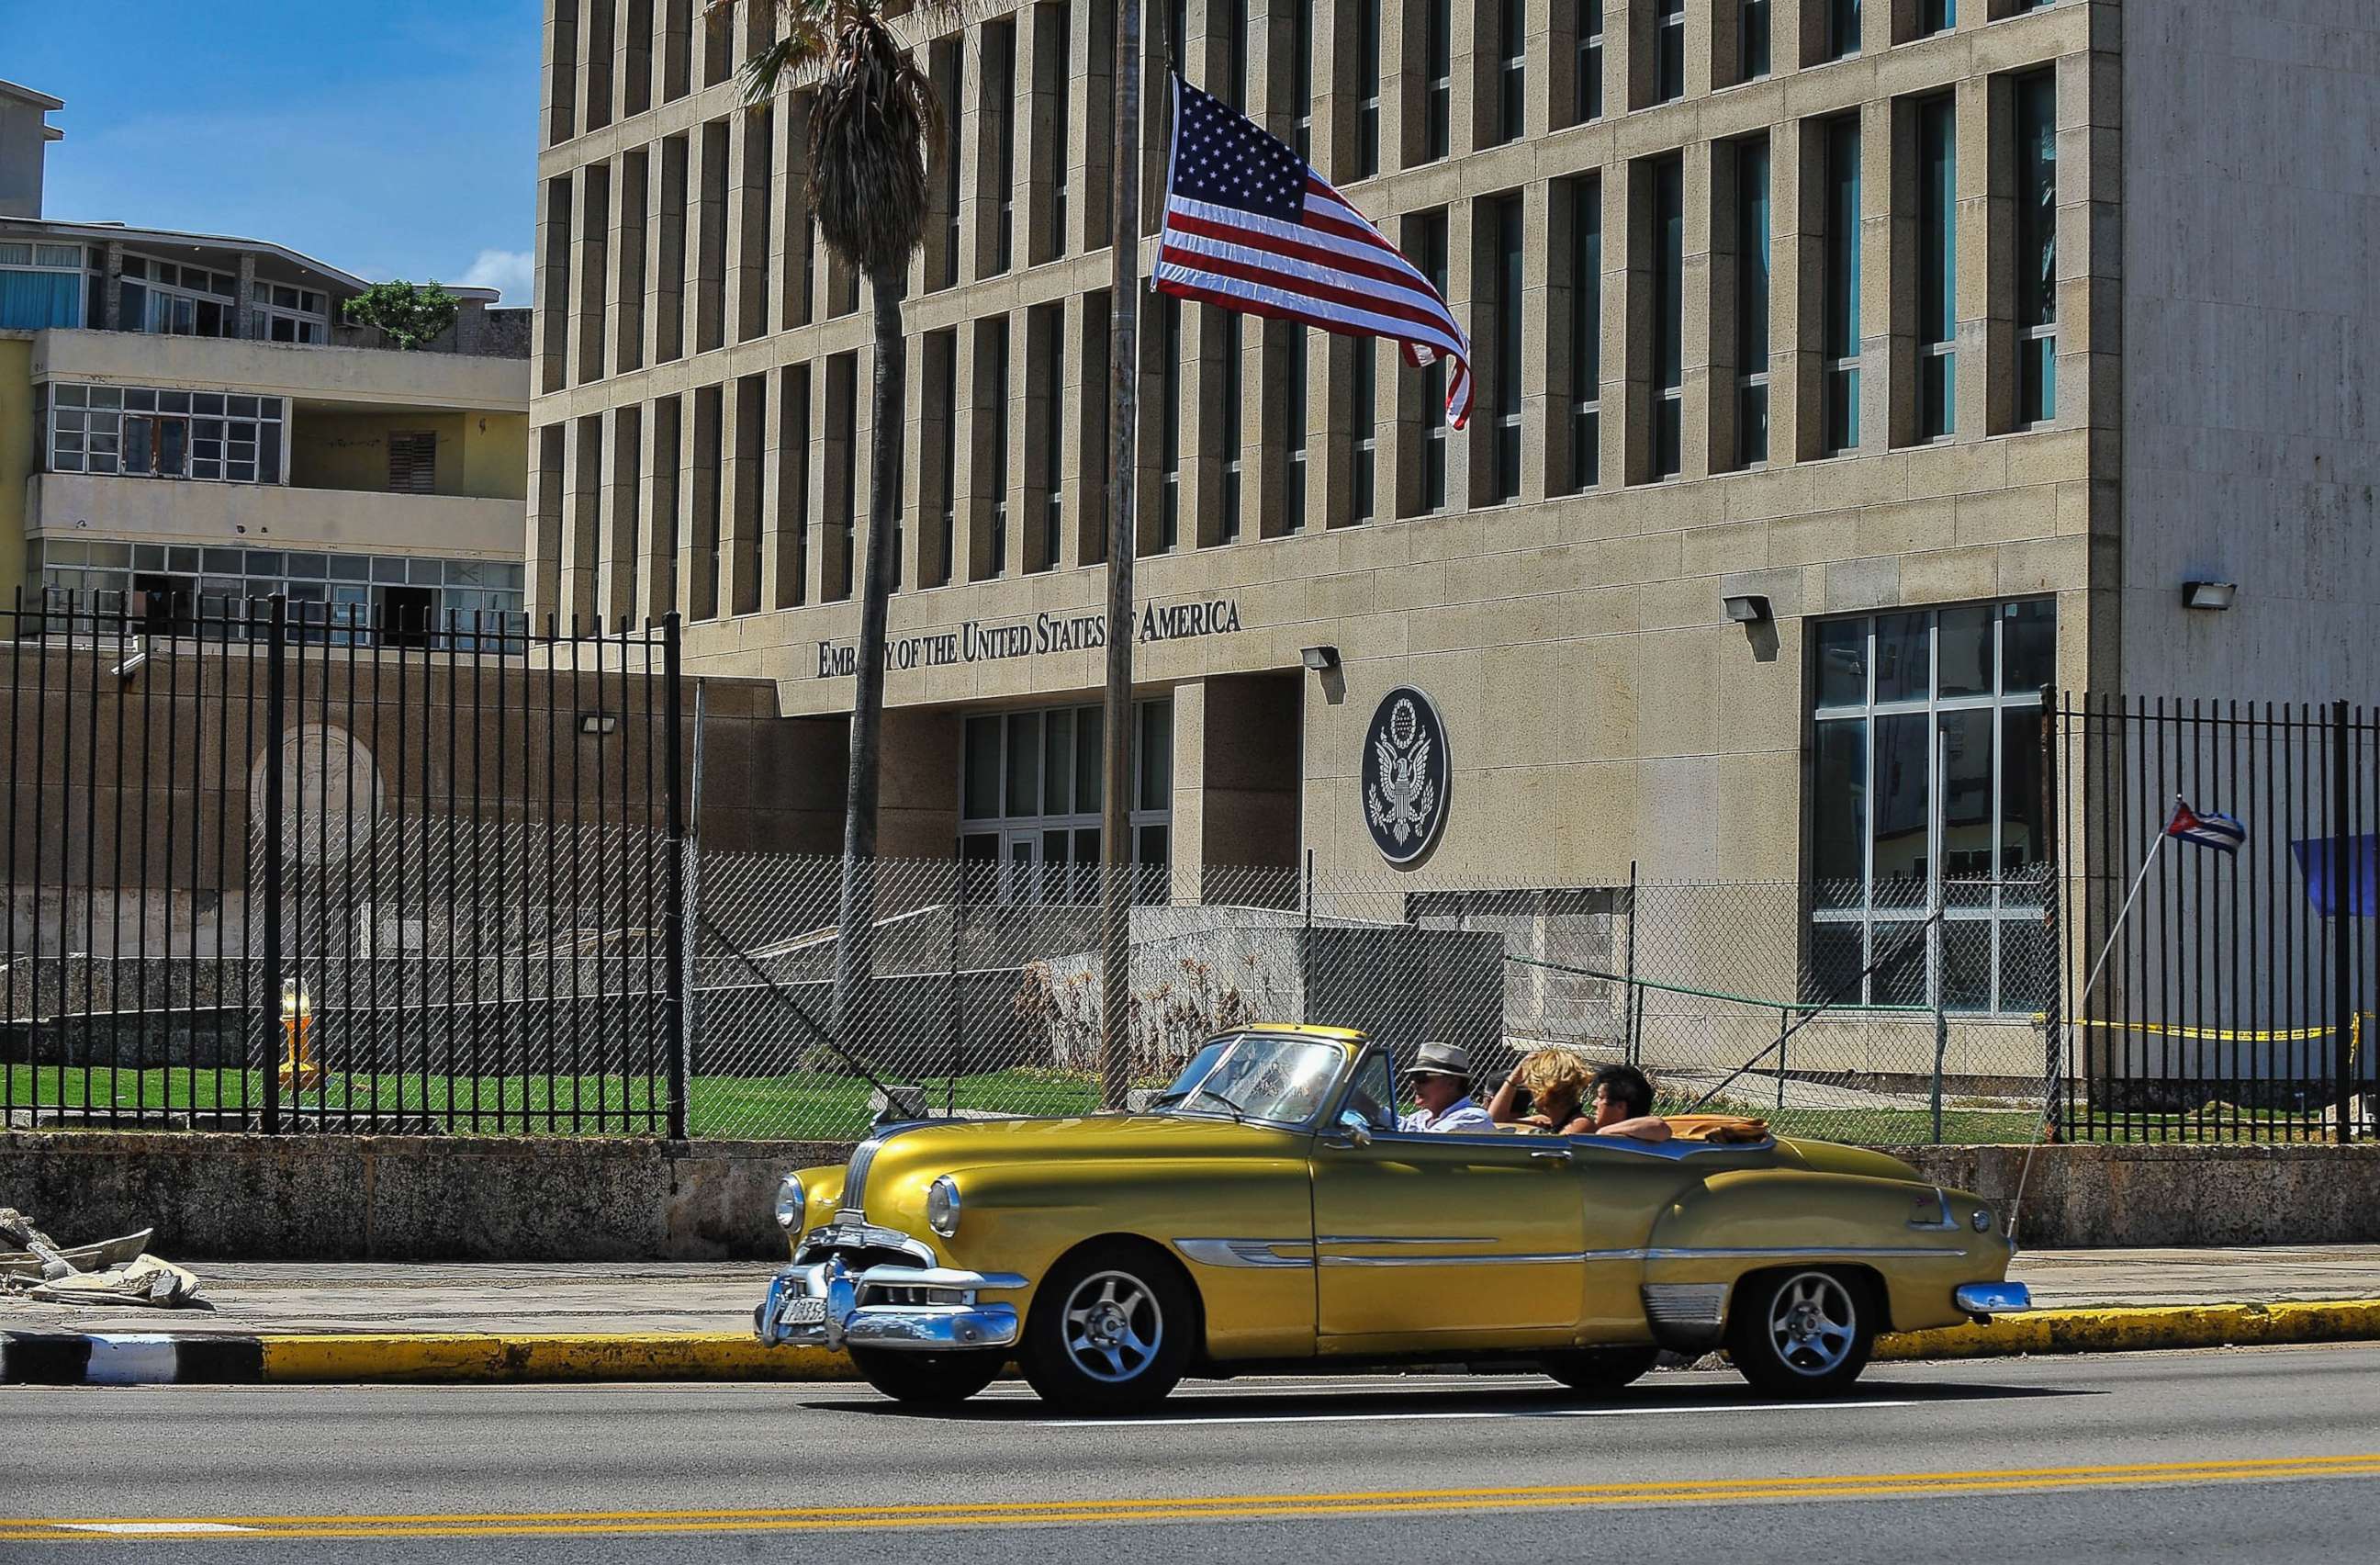 PHOTO: A vintage car drives past the  US embassy in Havana, Cuba, Oct. 3, 2017.